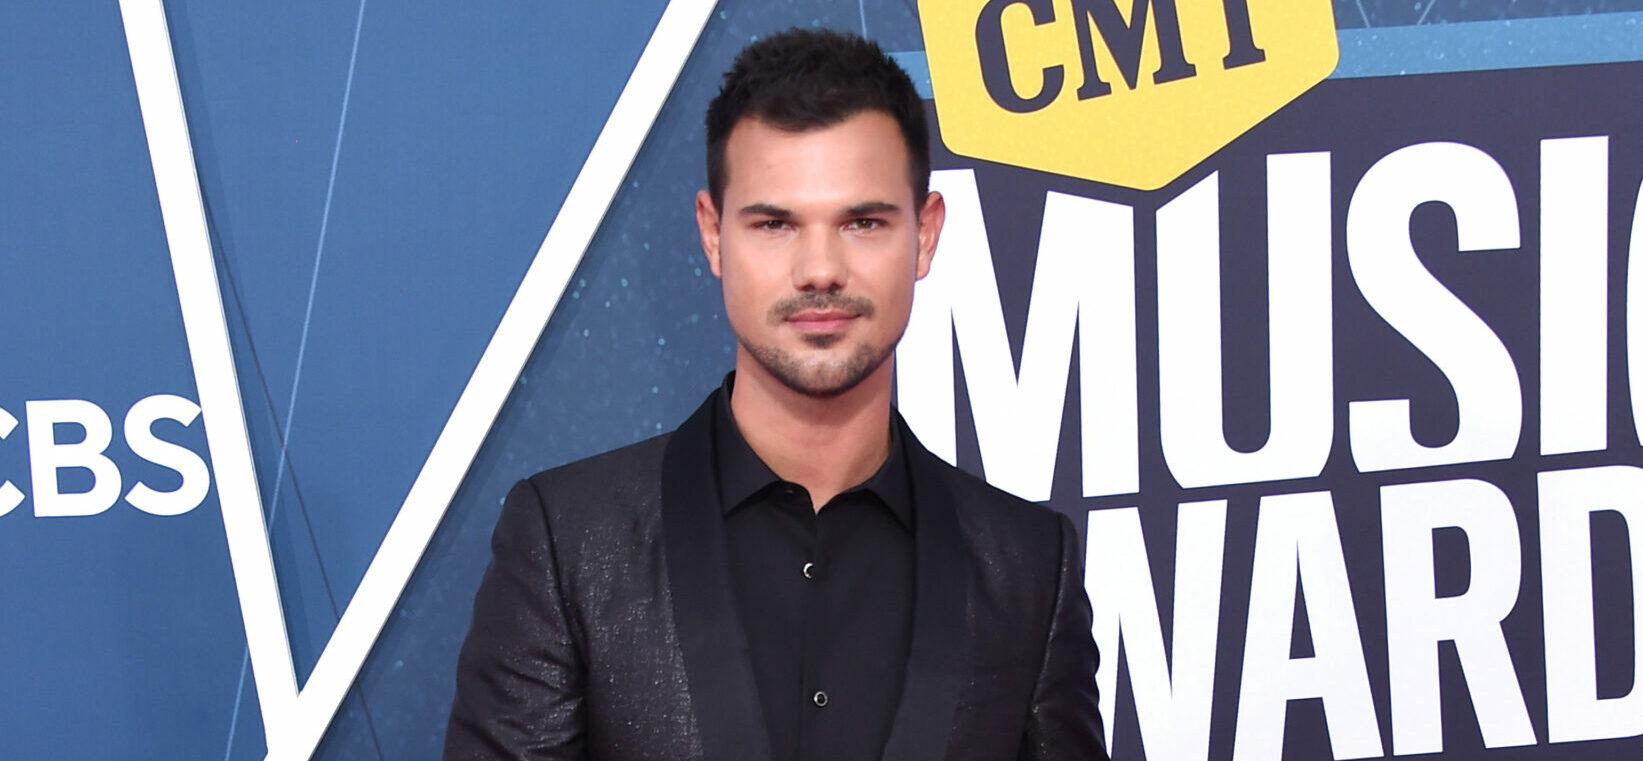 Taylor Lautner at the 2022 CMT Music Awards